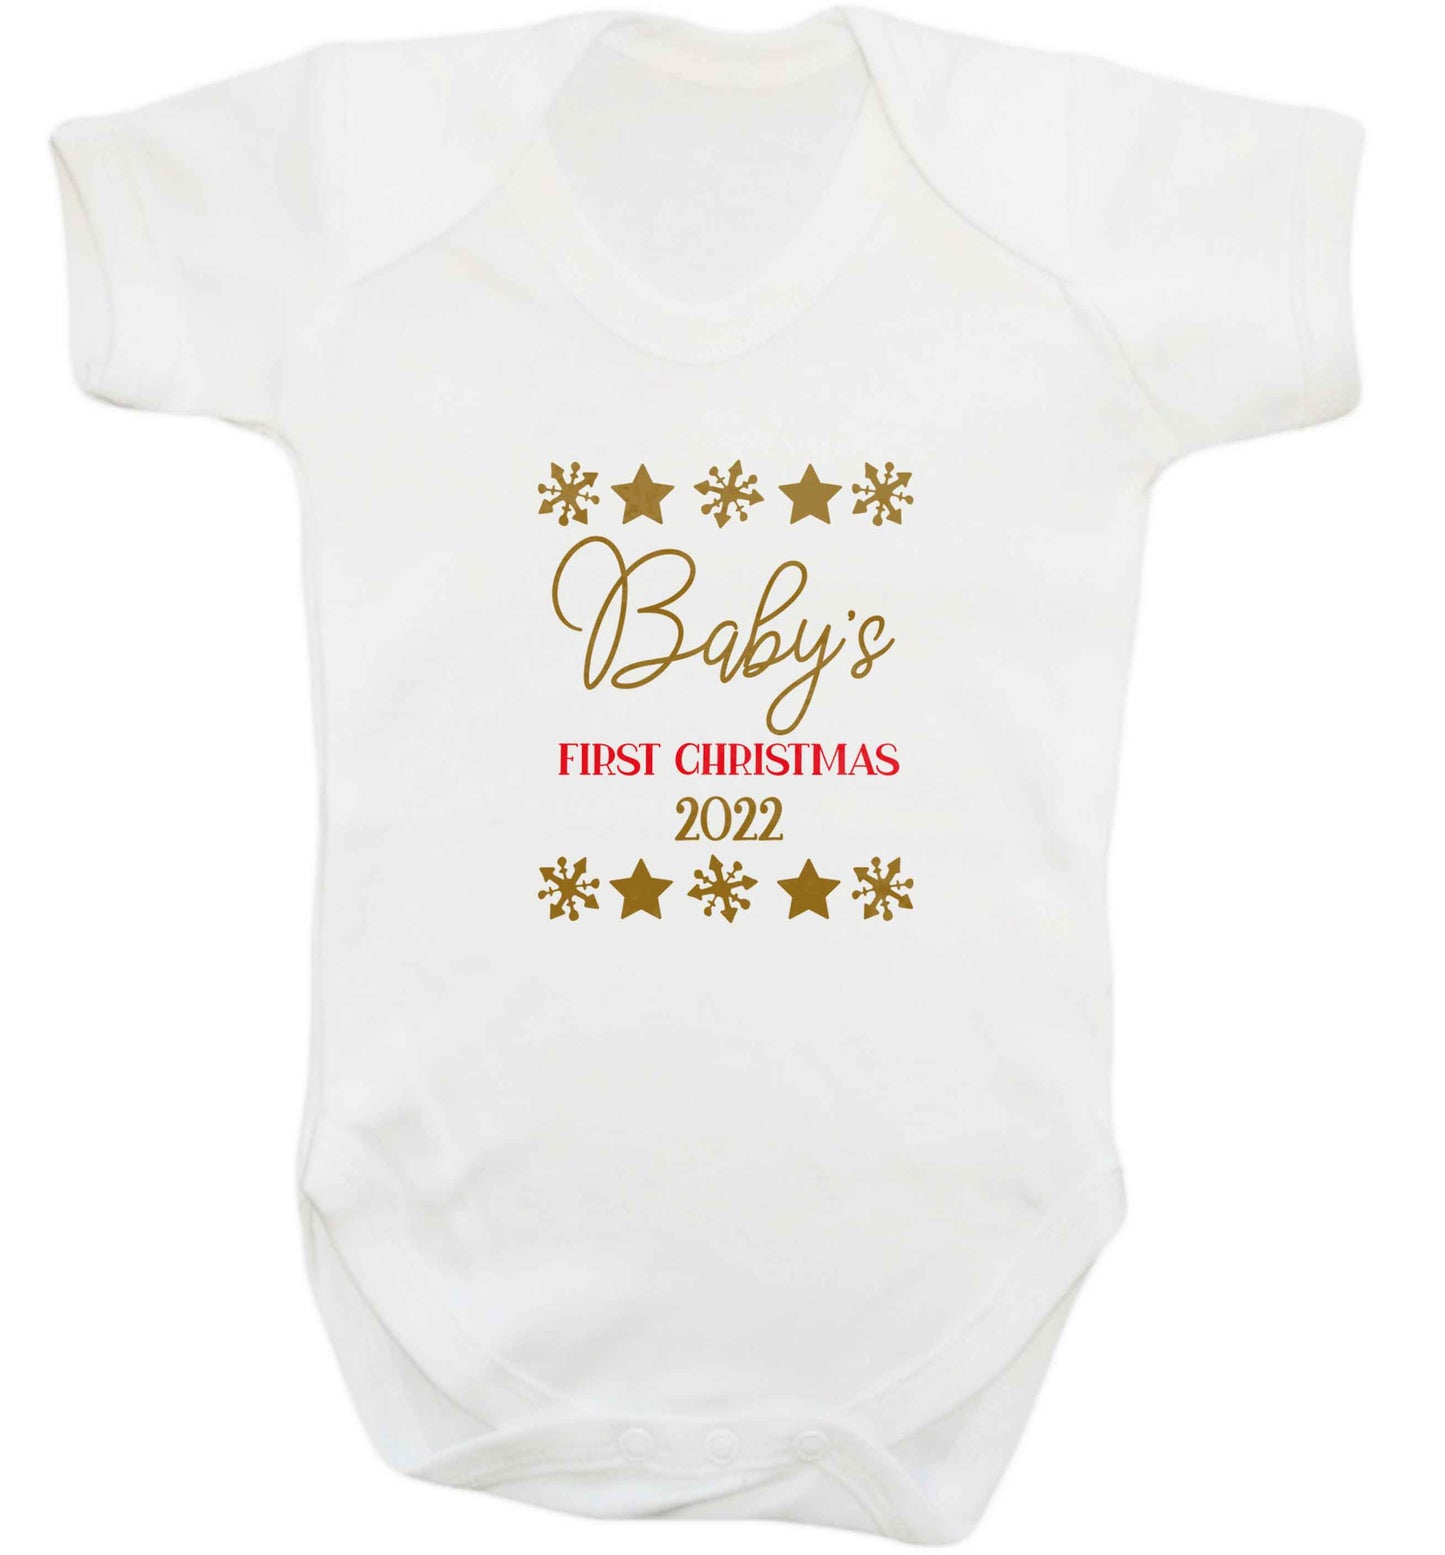 Baby's first Christmas baby vest white 18-24 months